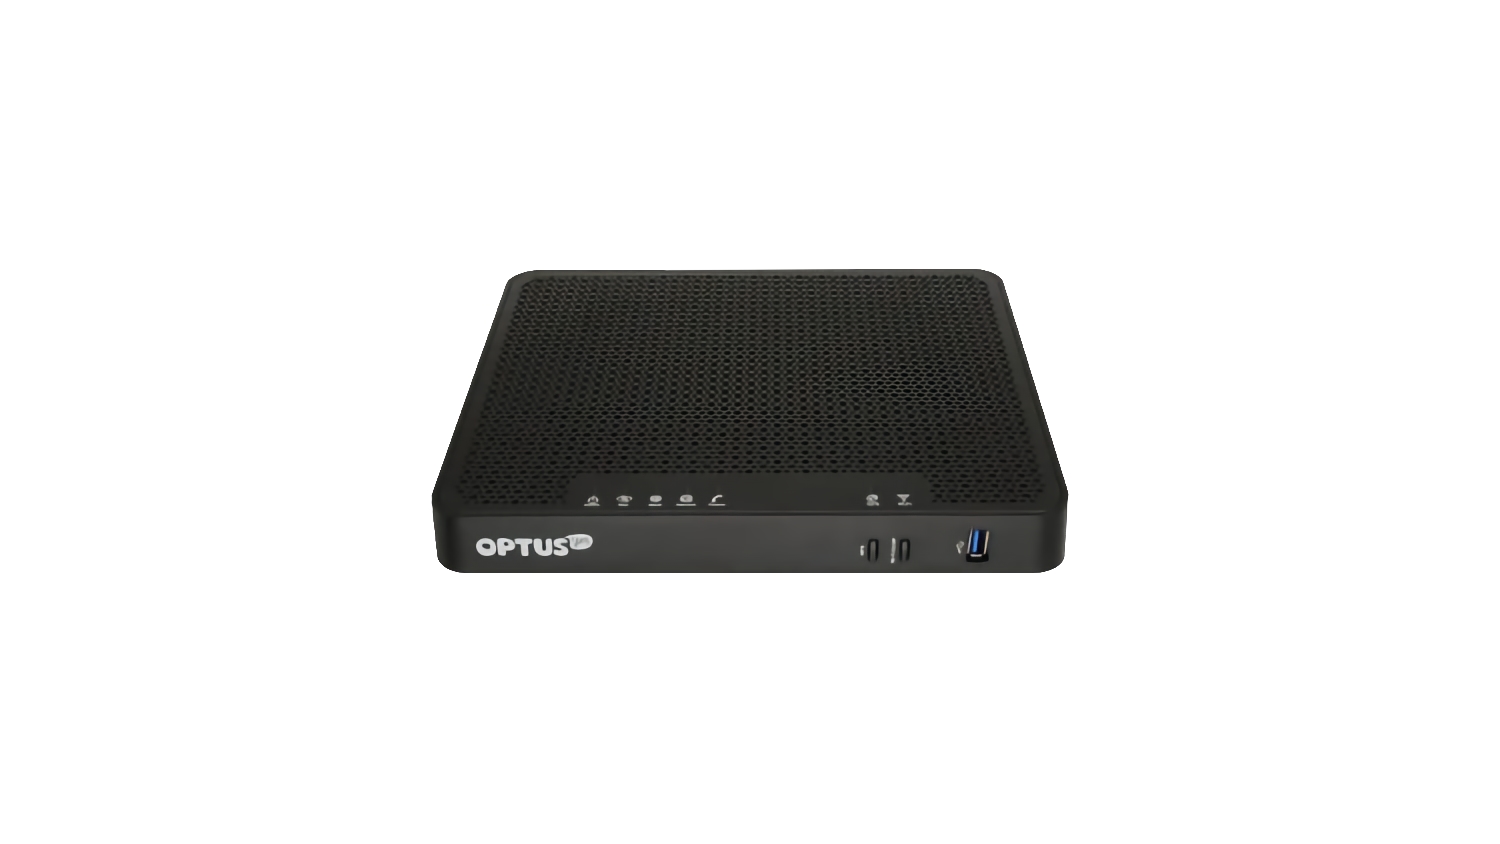 I fare Skubbe Observatory Sagemcom F@ST 3864AC (Optus) Review | NBN modem-router | CHOICE